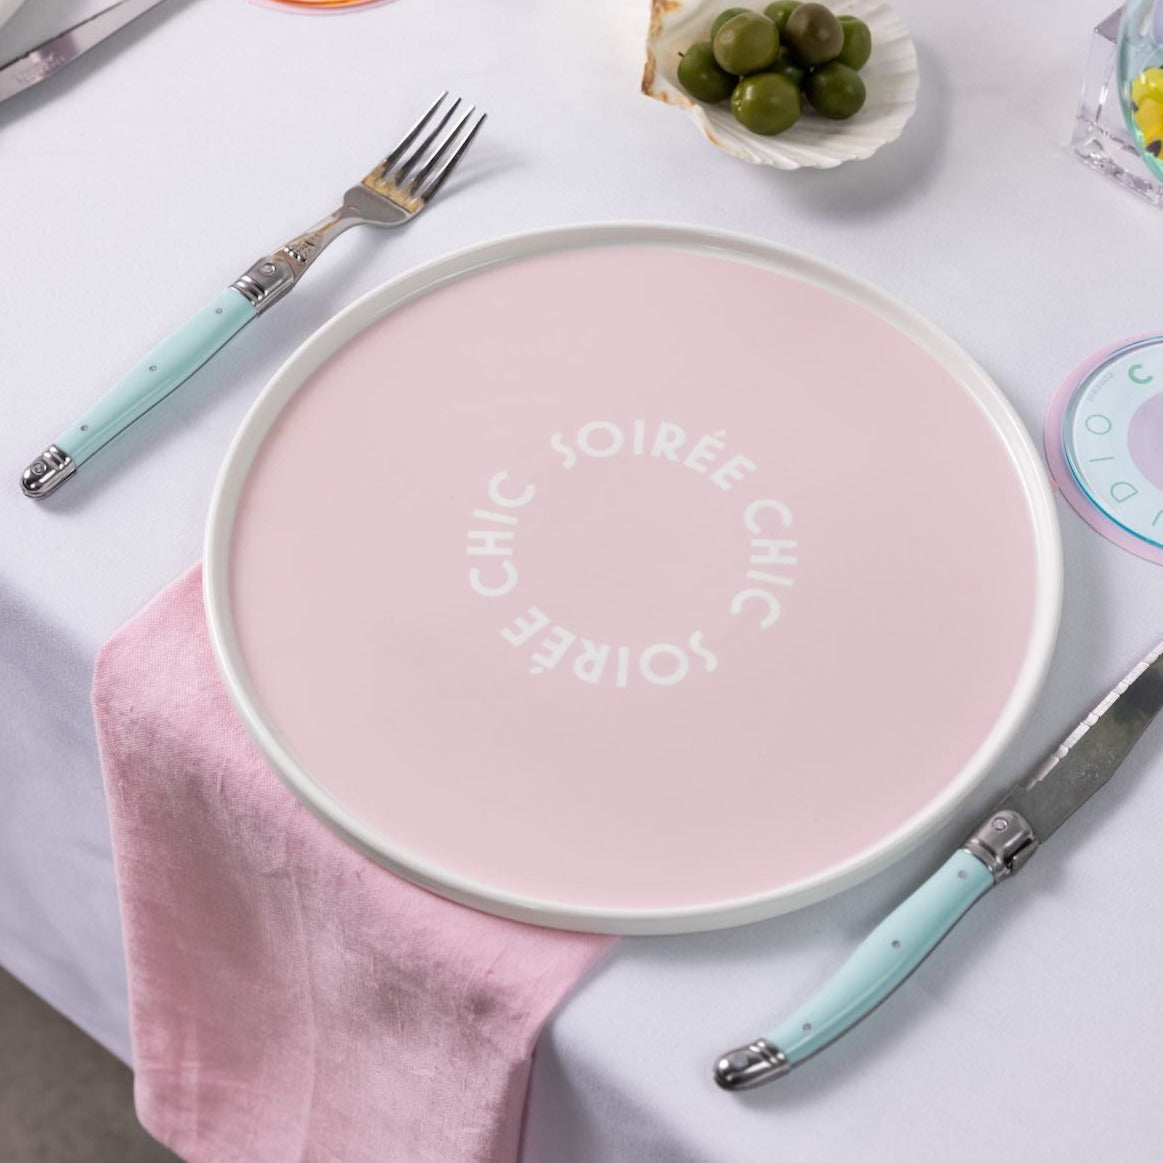 Soirée chic - Dining plates. Fancy party plate